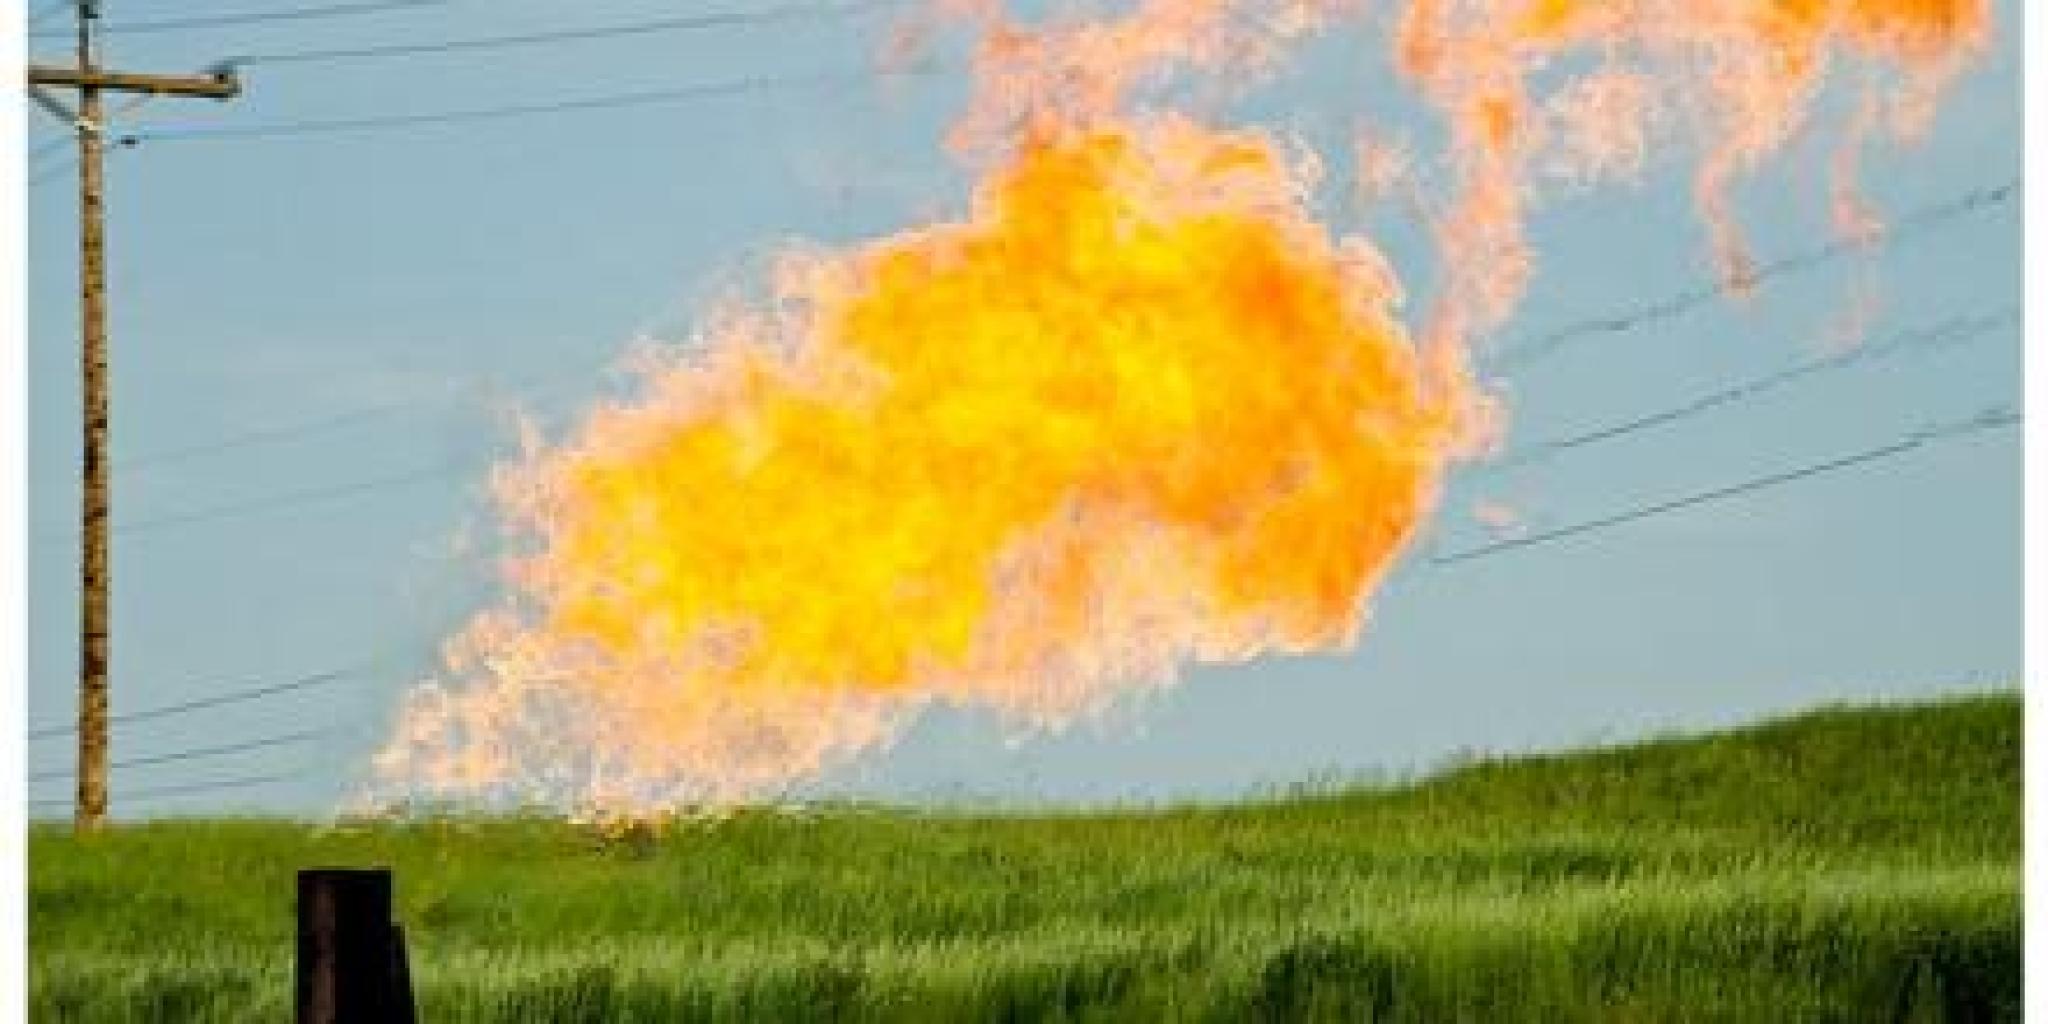 Image of natural gas flares from a flare-head at the Orvis State well on the Evanson family farm in McKenzie County, North Dakota, USA, by Tim Evanson (CC BY-SA 2.0) from Wikipedia Commons